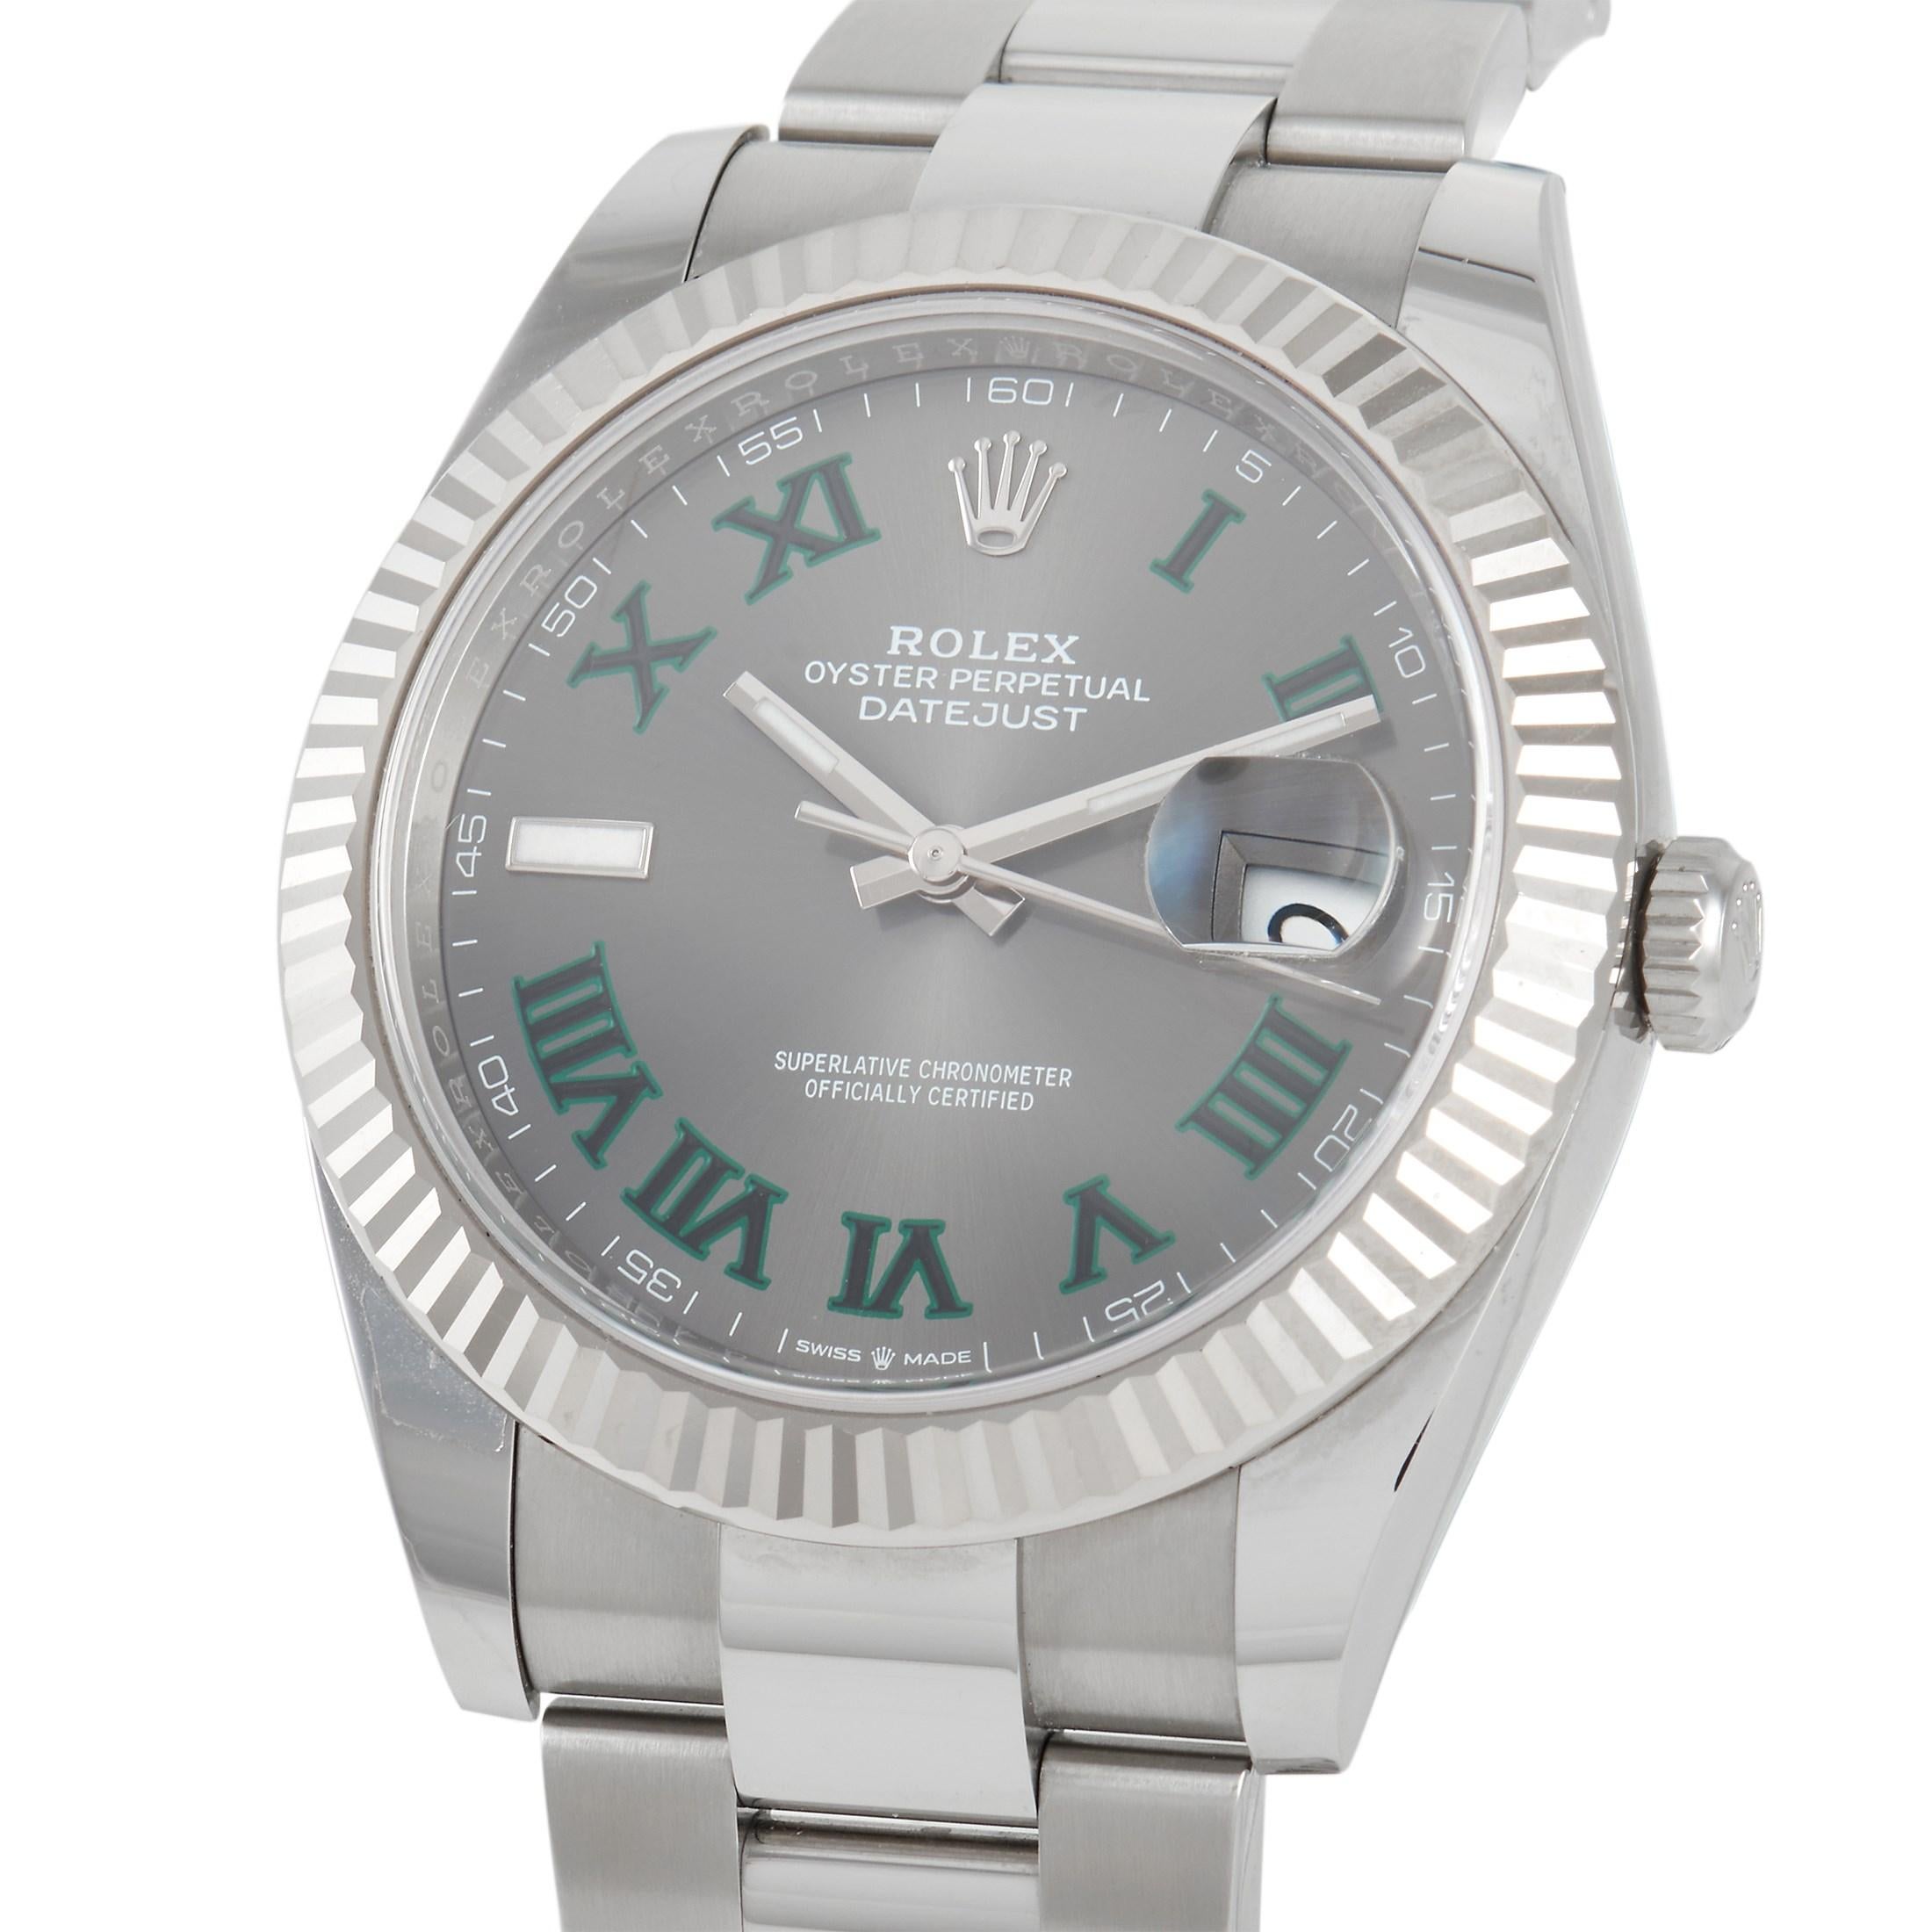 Producing a striking and tasteful visual effect with the addition of the iconic fluted bezel and neat green numerals, Rolex created this sublime timepiece from the esteemed Datejust collection which guarantees superb performance and stylish